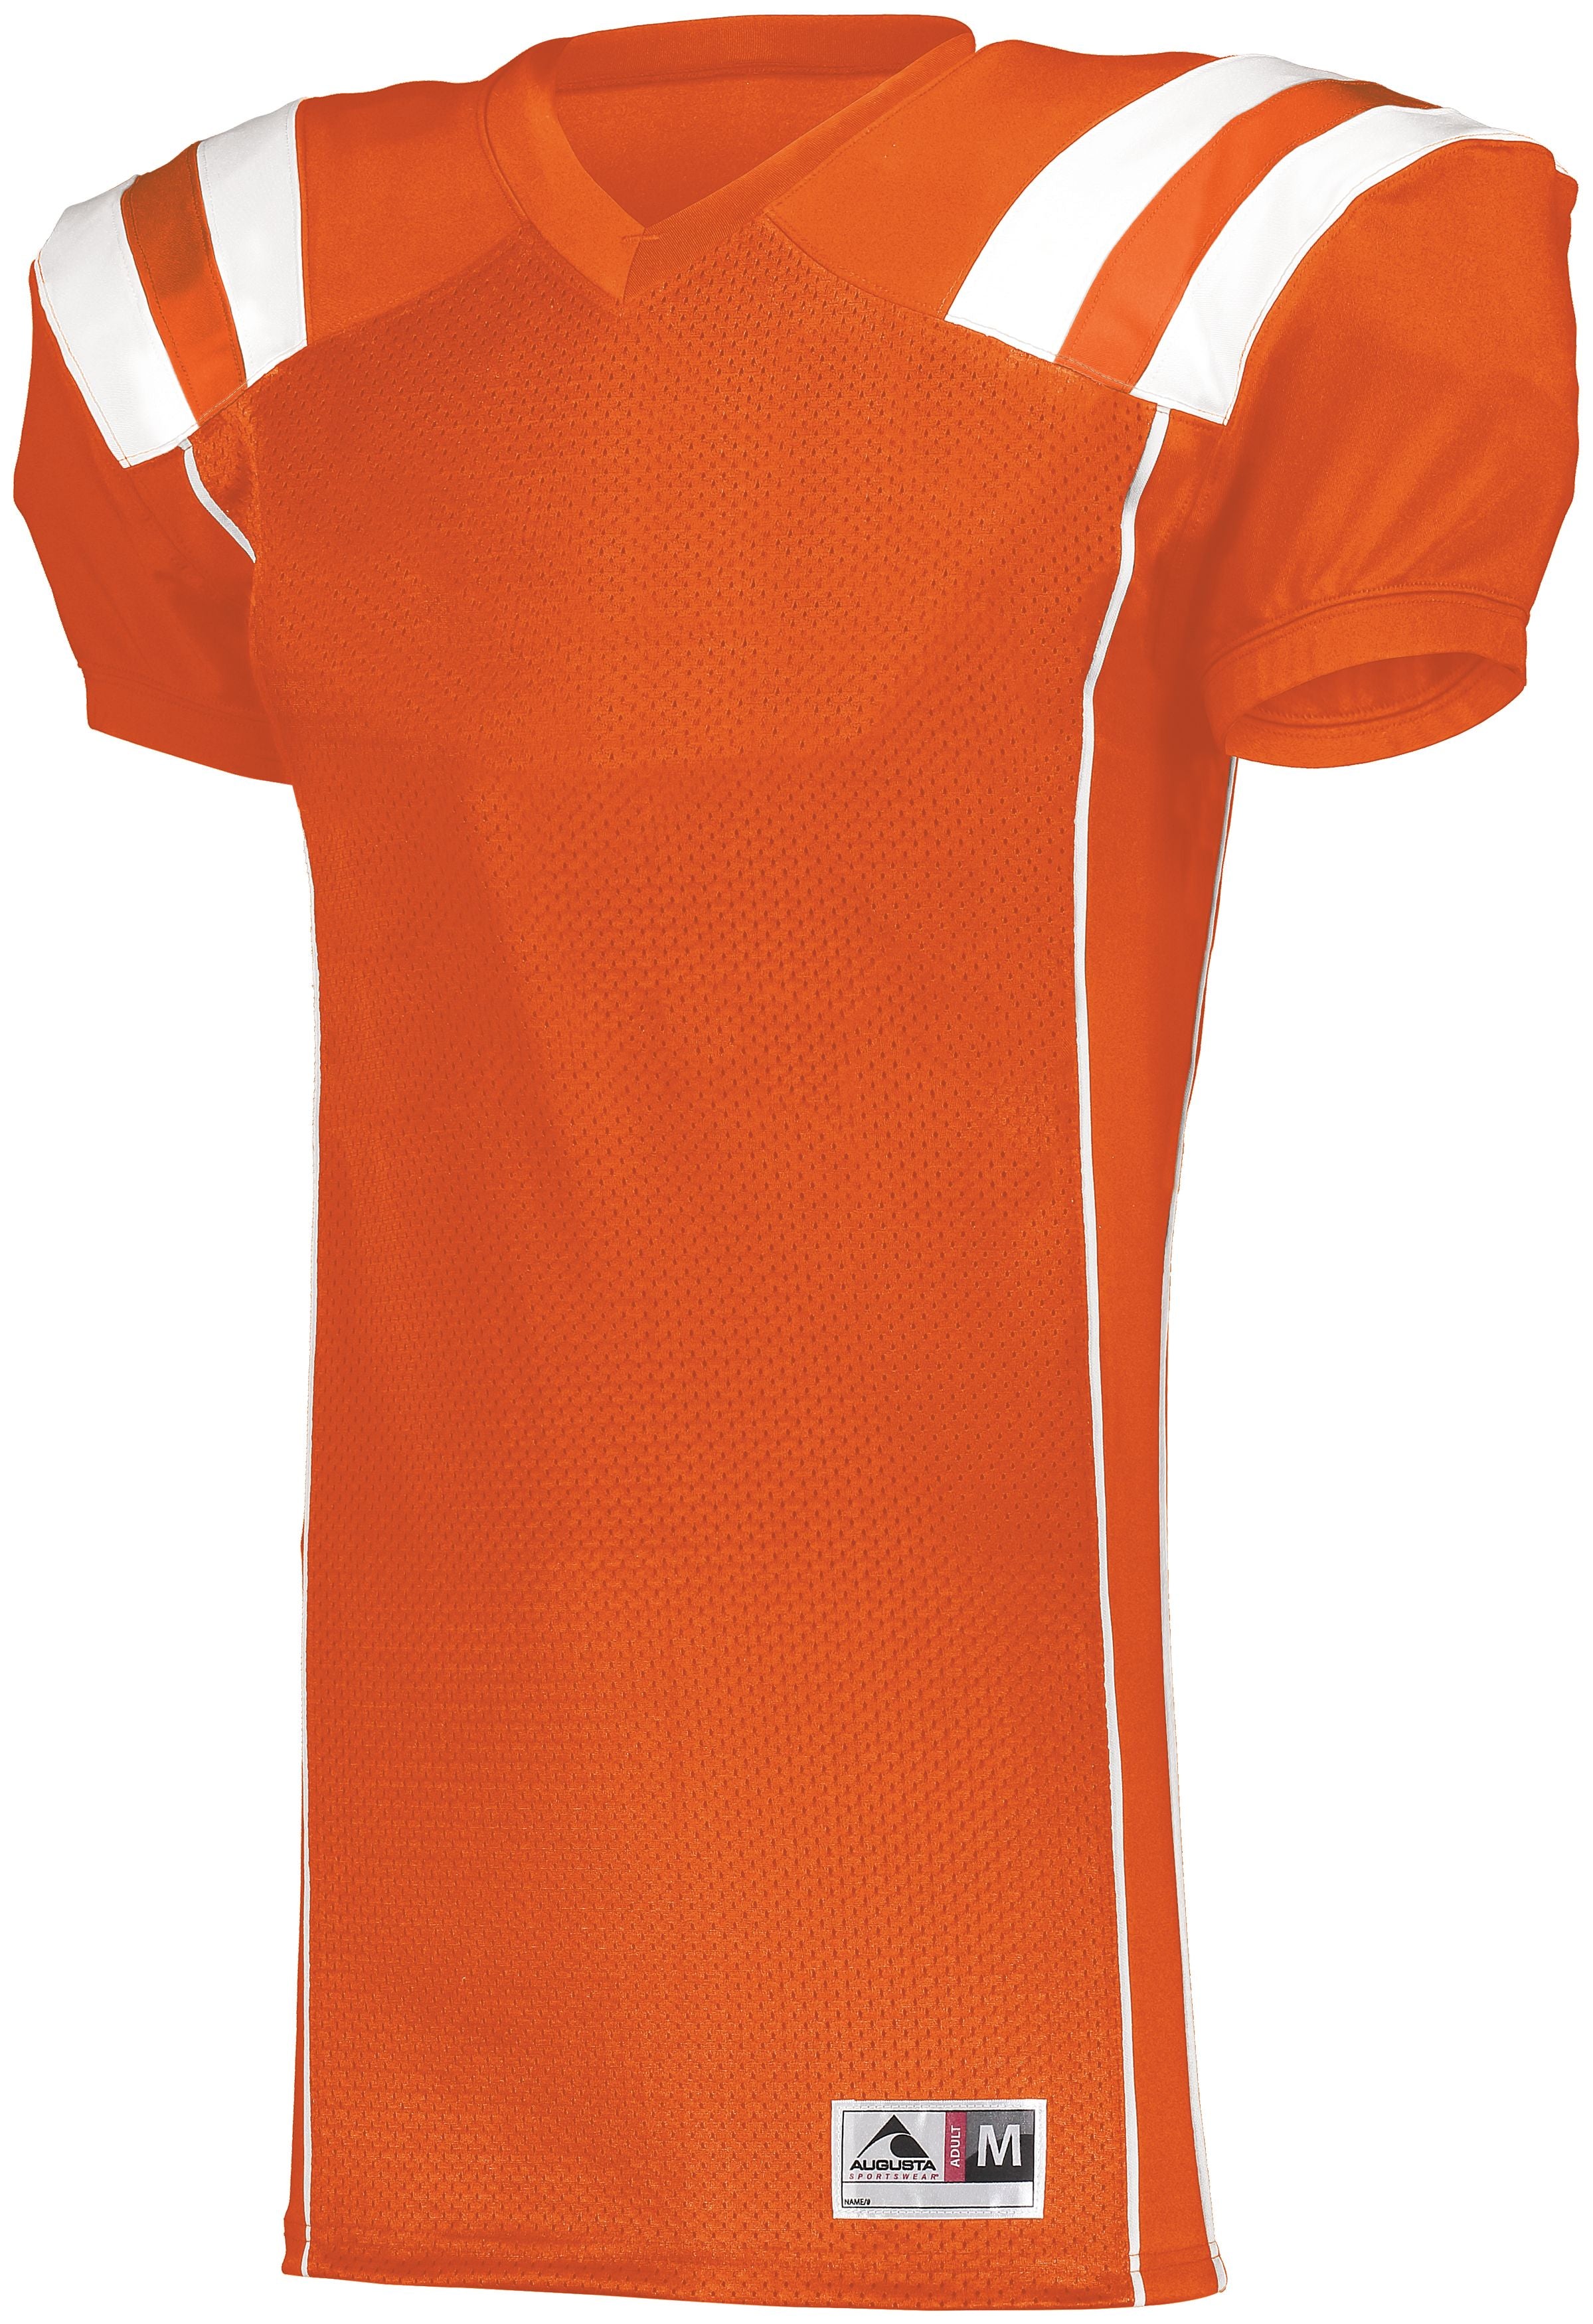 Augusta Sportswear Youth Tform Football Jersey in Orange/White  -Part of the Youth, Youth-Jersey, Augusta-Products, Football, Shirts, All-Sports, All-Sports-1 product lines at KanaleyCreations.com